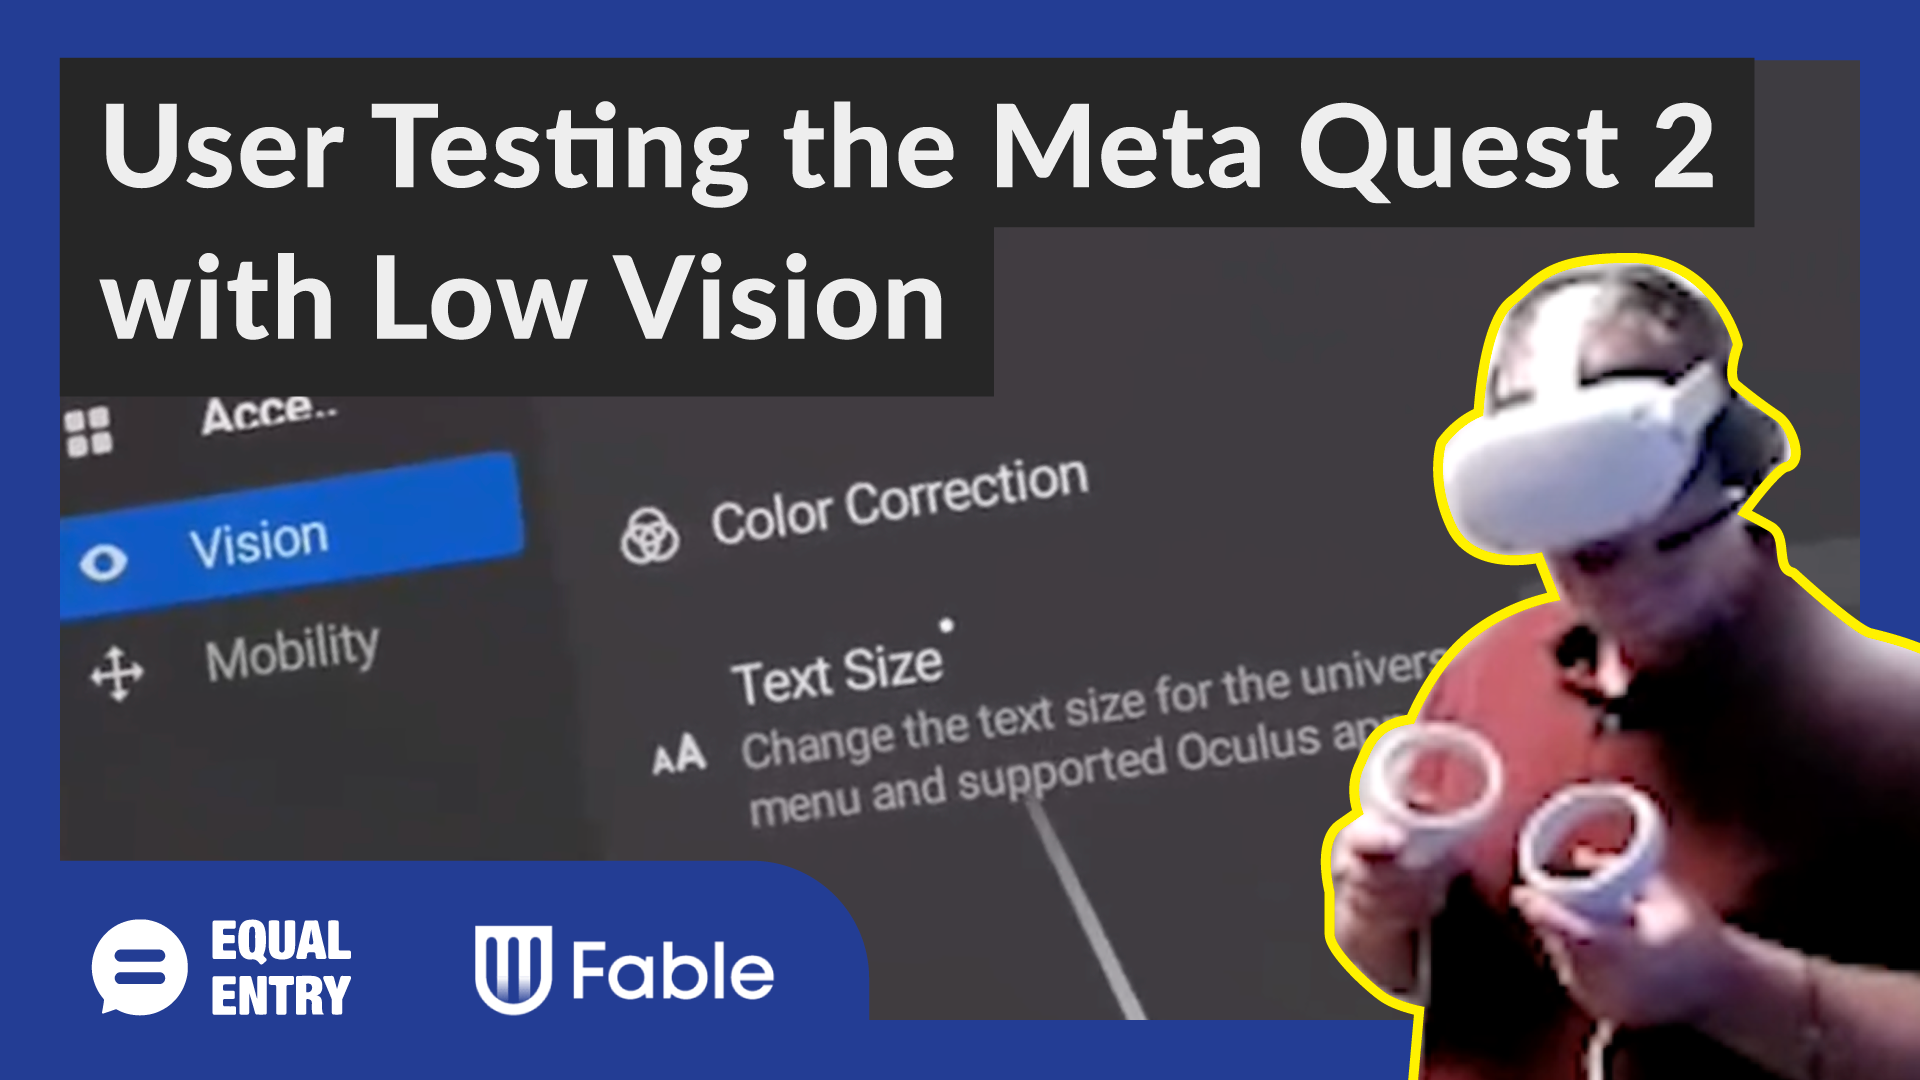 Shane Kehoe from Fable wears a Meta Quest 2 headset and highlights vision options in the user interface